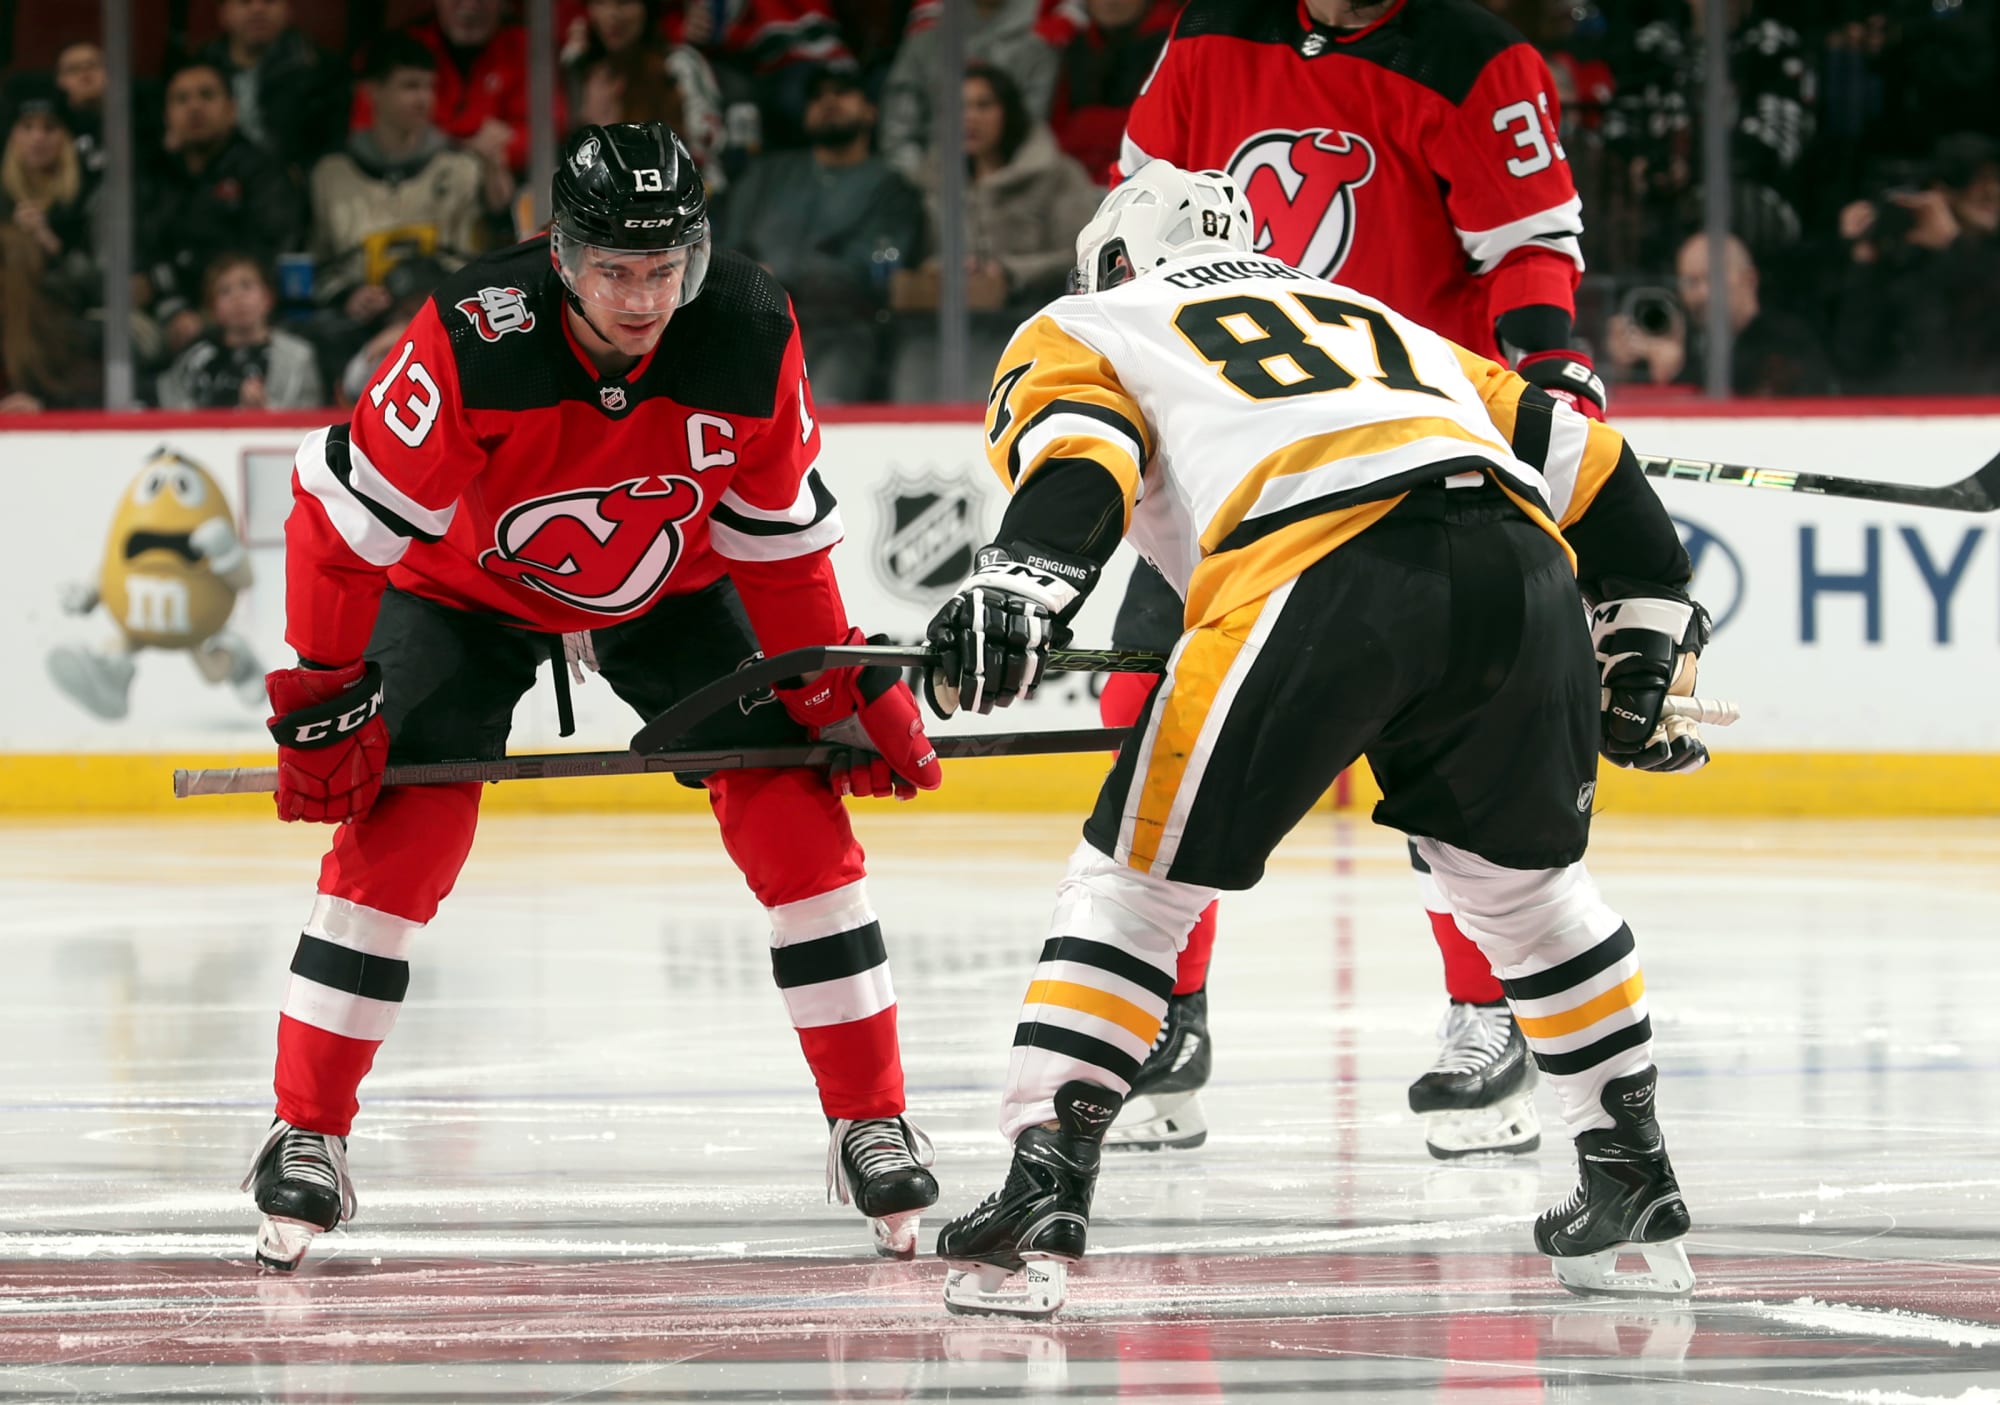 Game Preview #13: New Jersey Devils vs. Boston Bruins - All About The Jersey